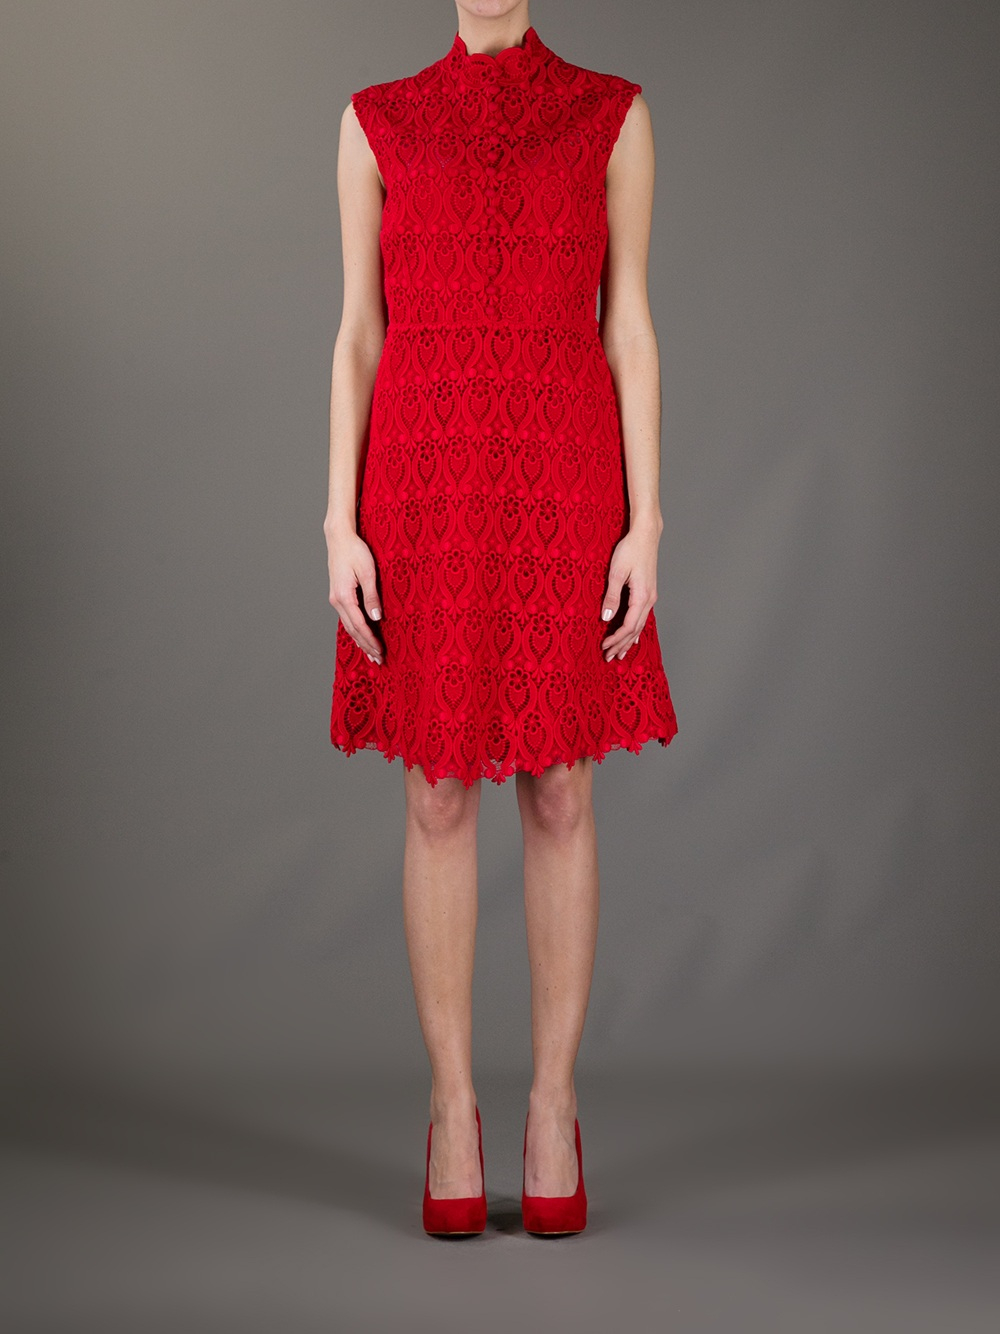 Lyst - Valentino Fitted Lace Dress in Red